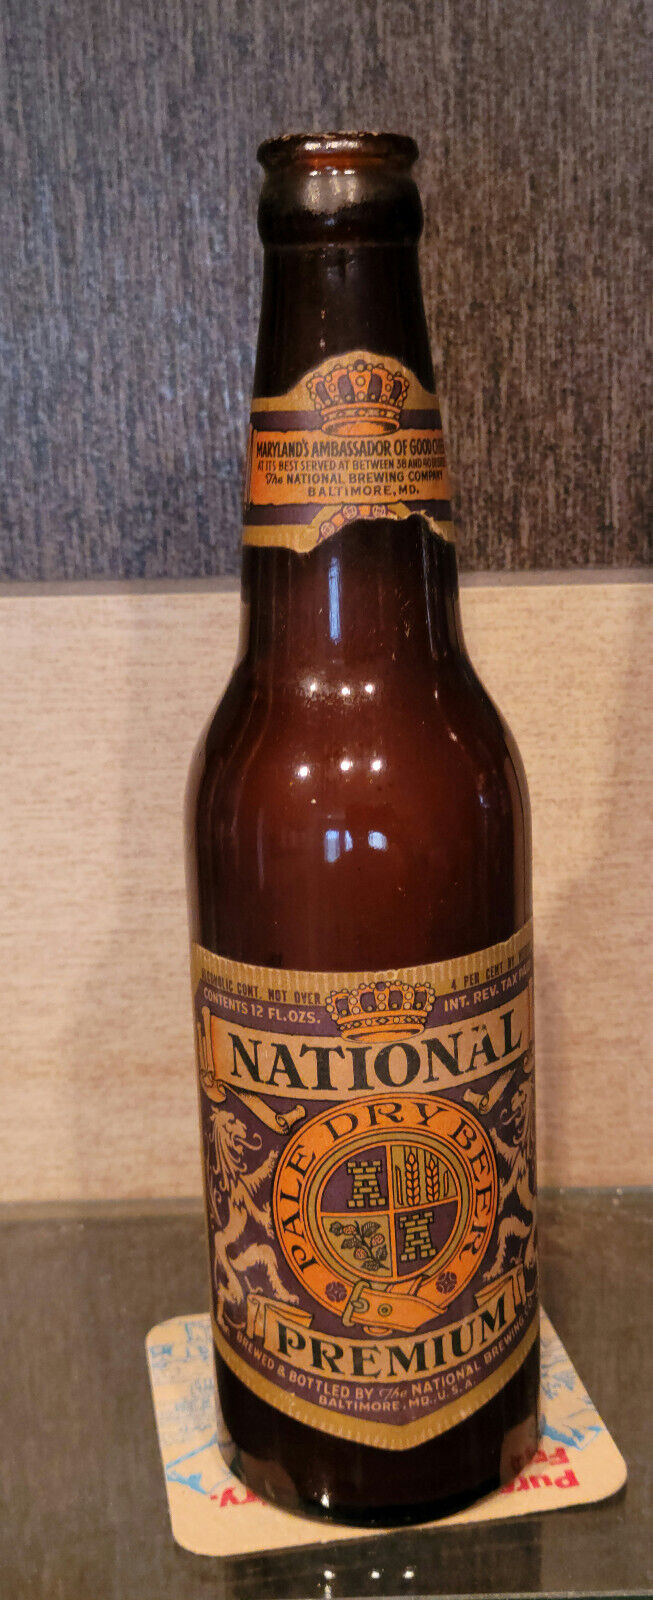 1940s NATIONAL PREMIUM PALE DRY BEER BOTTLE WITH NECK LABEL BALTIMORE MD IRTP